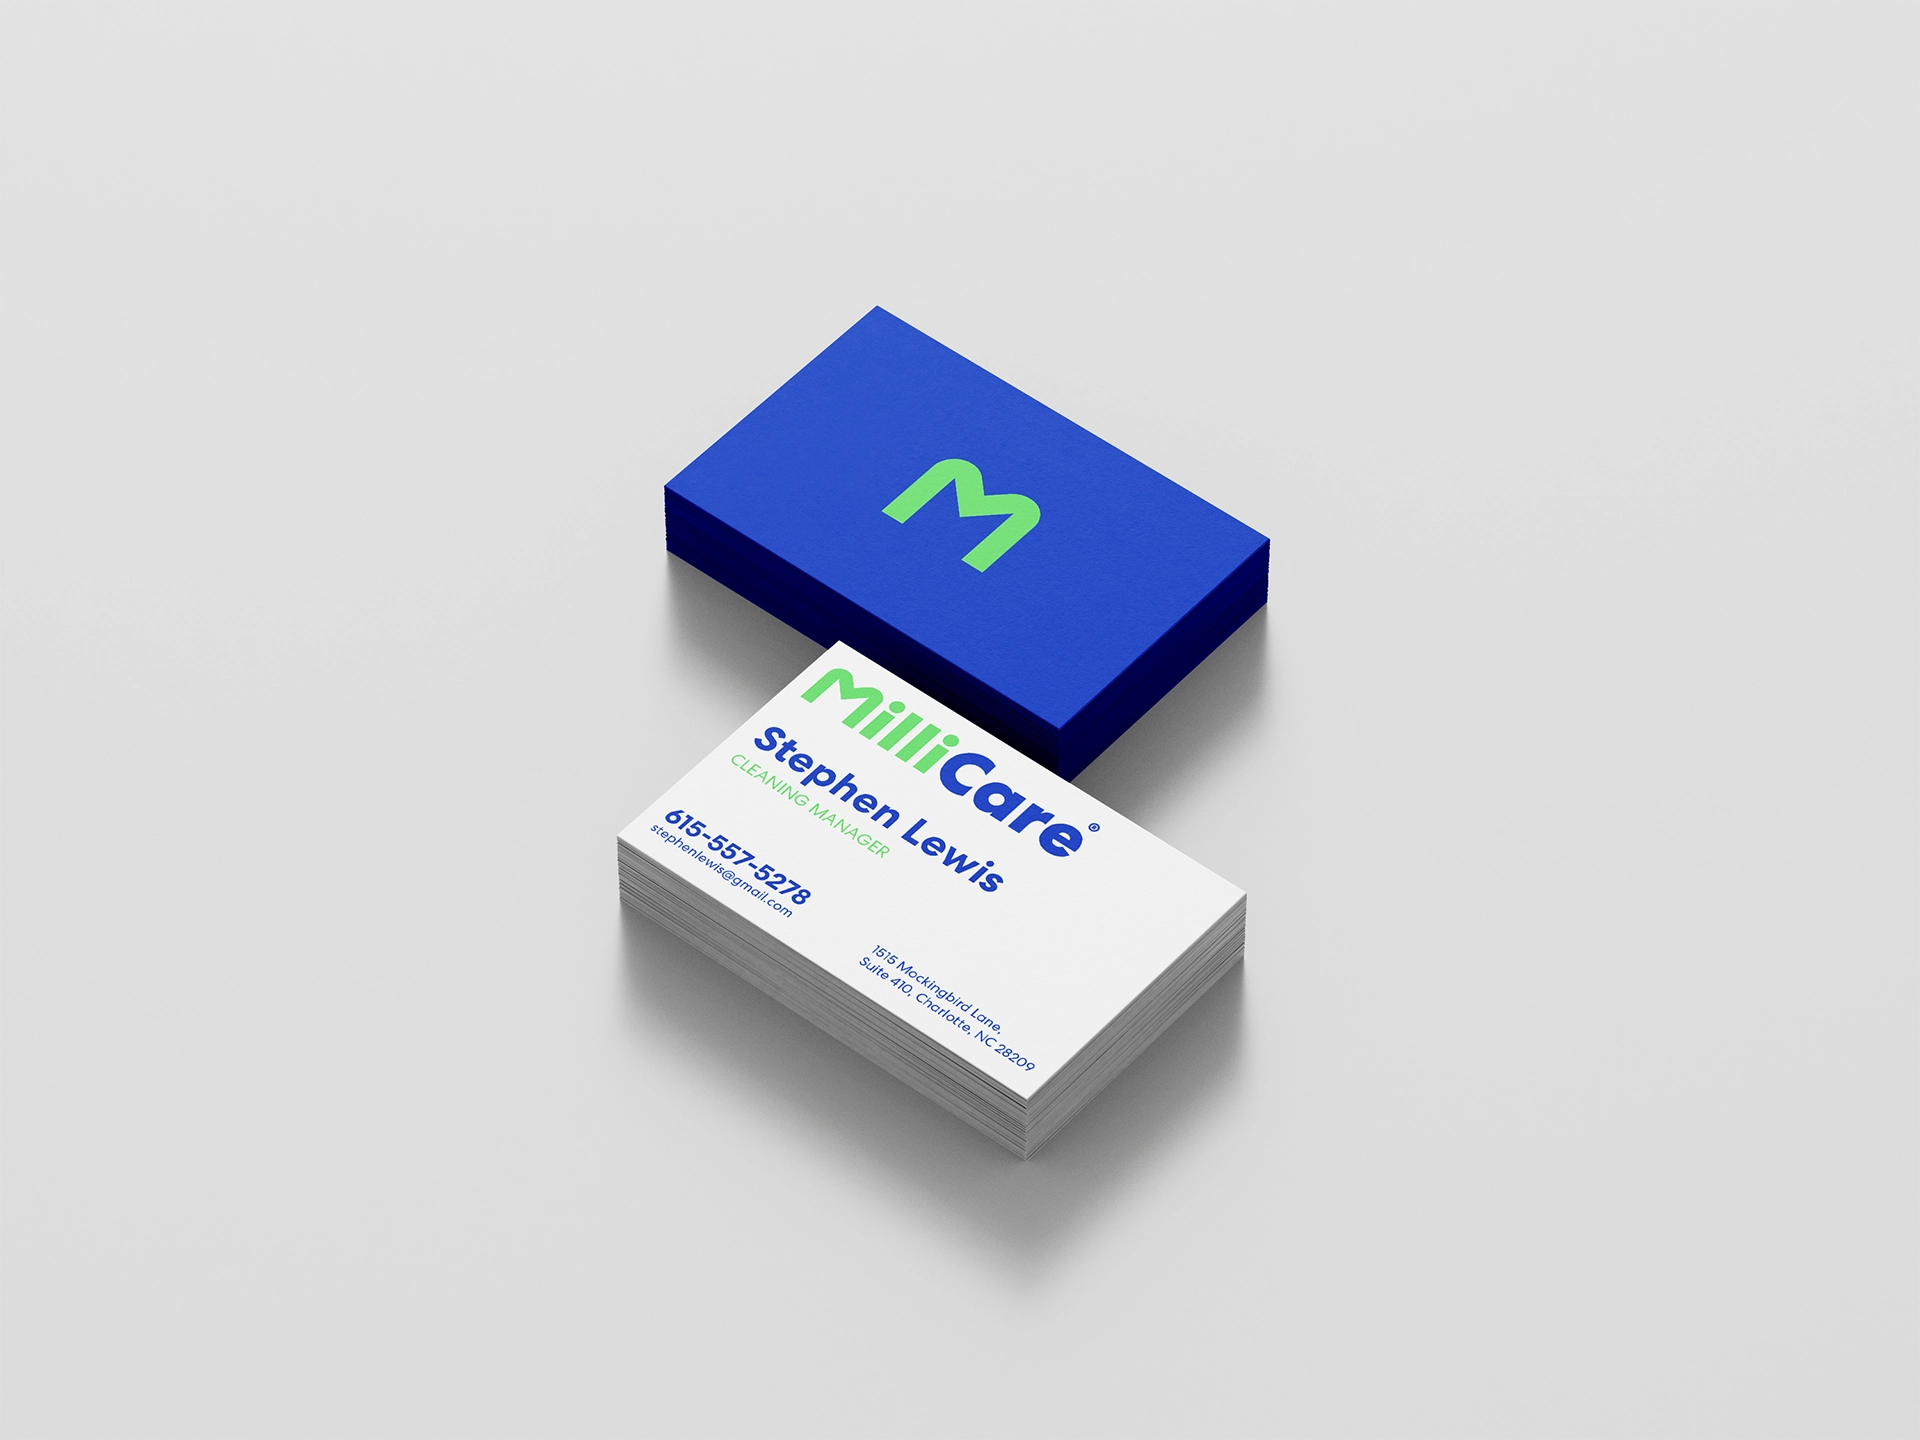 Millicare Business Card Redesign